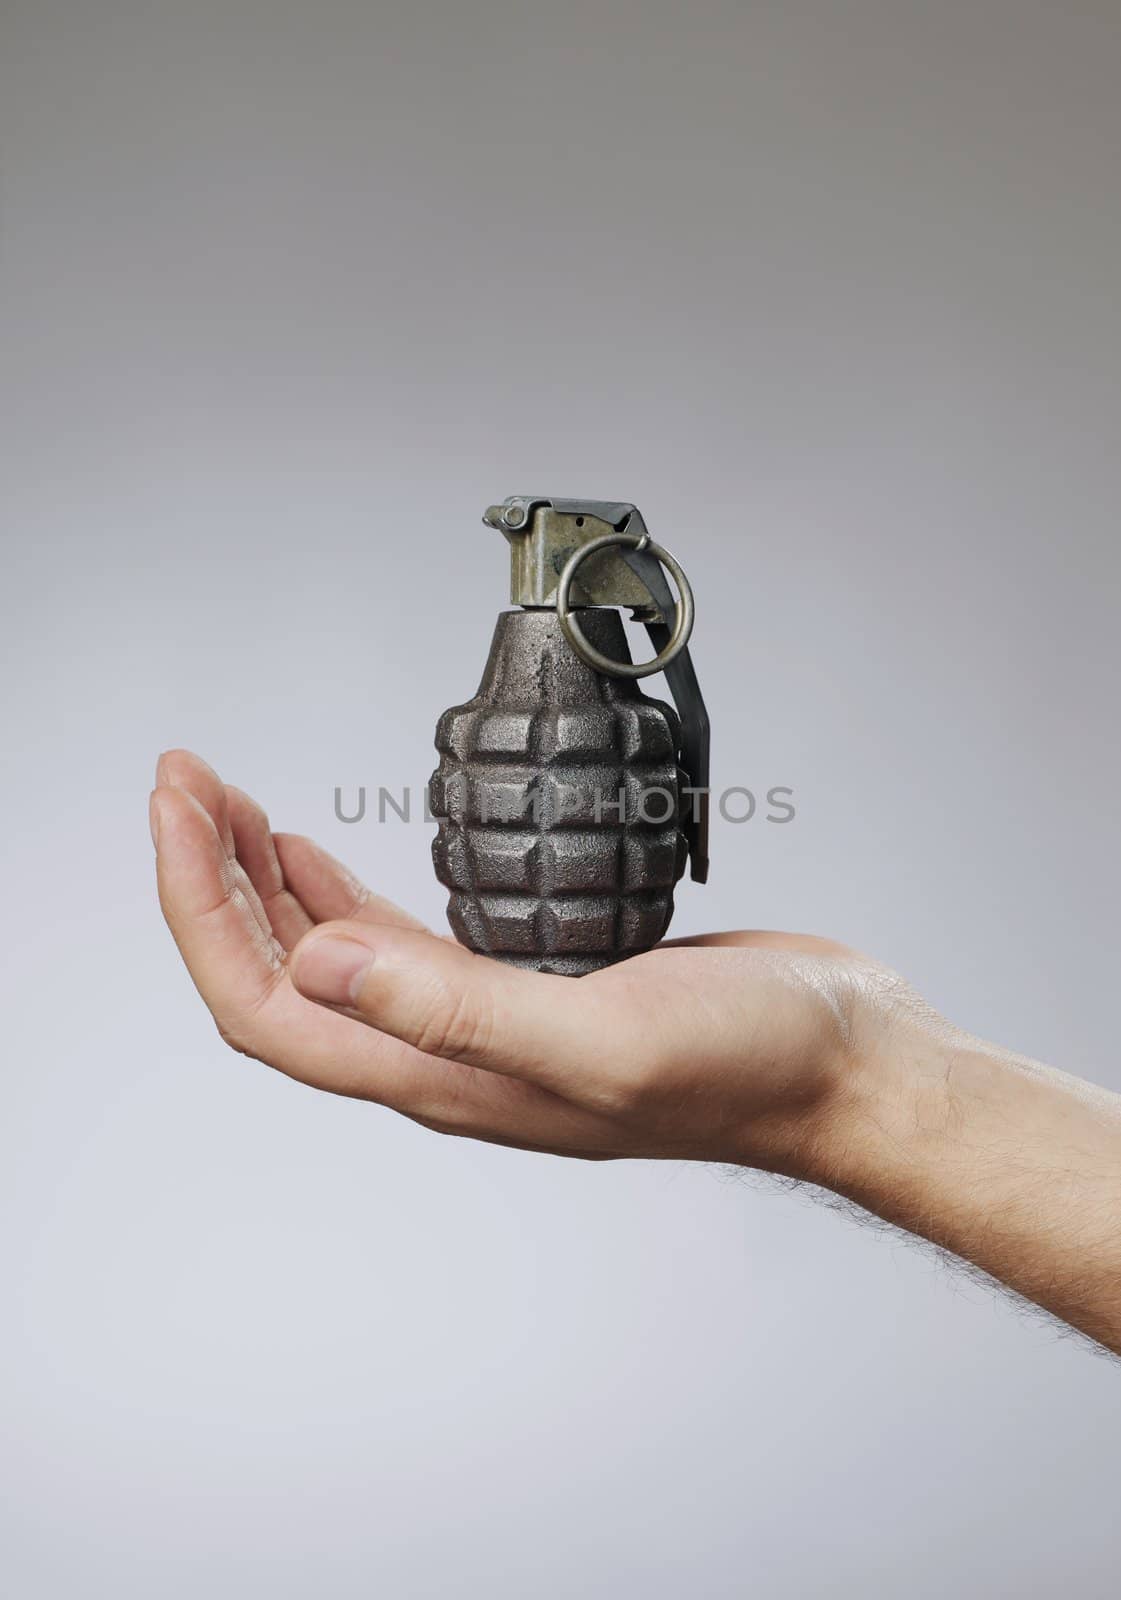 Man holding a hand grenade in his hand